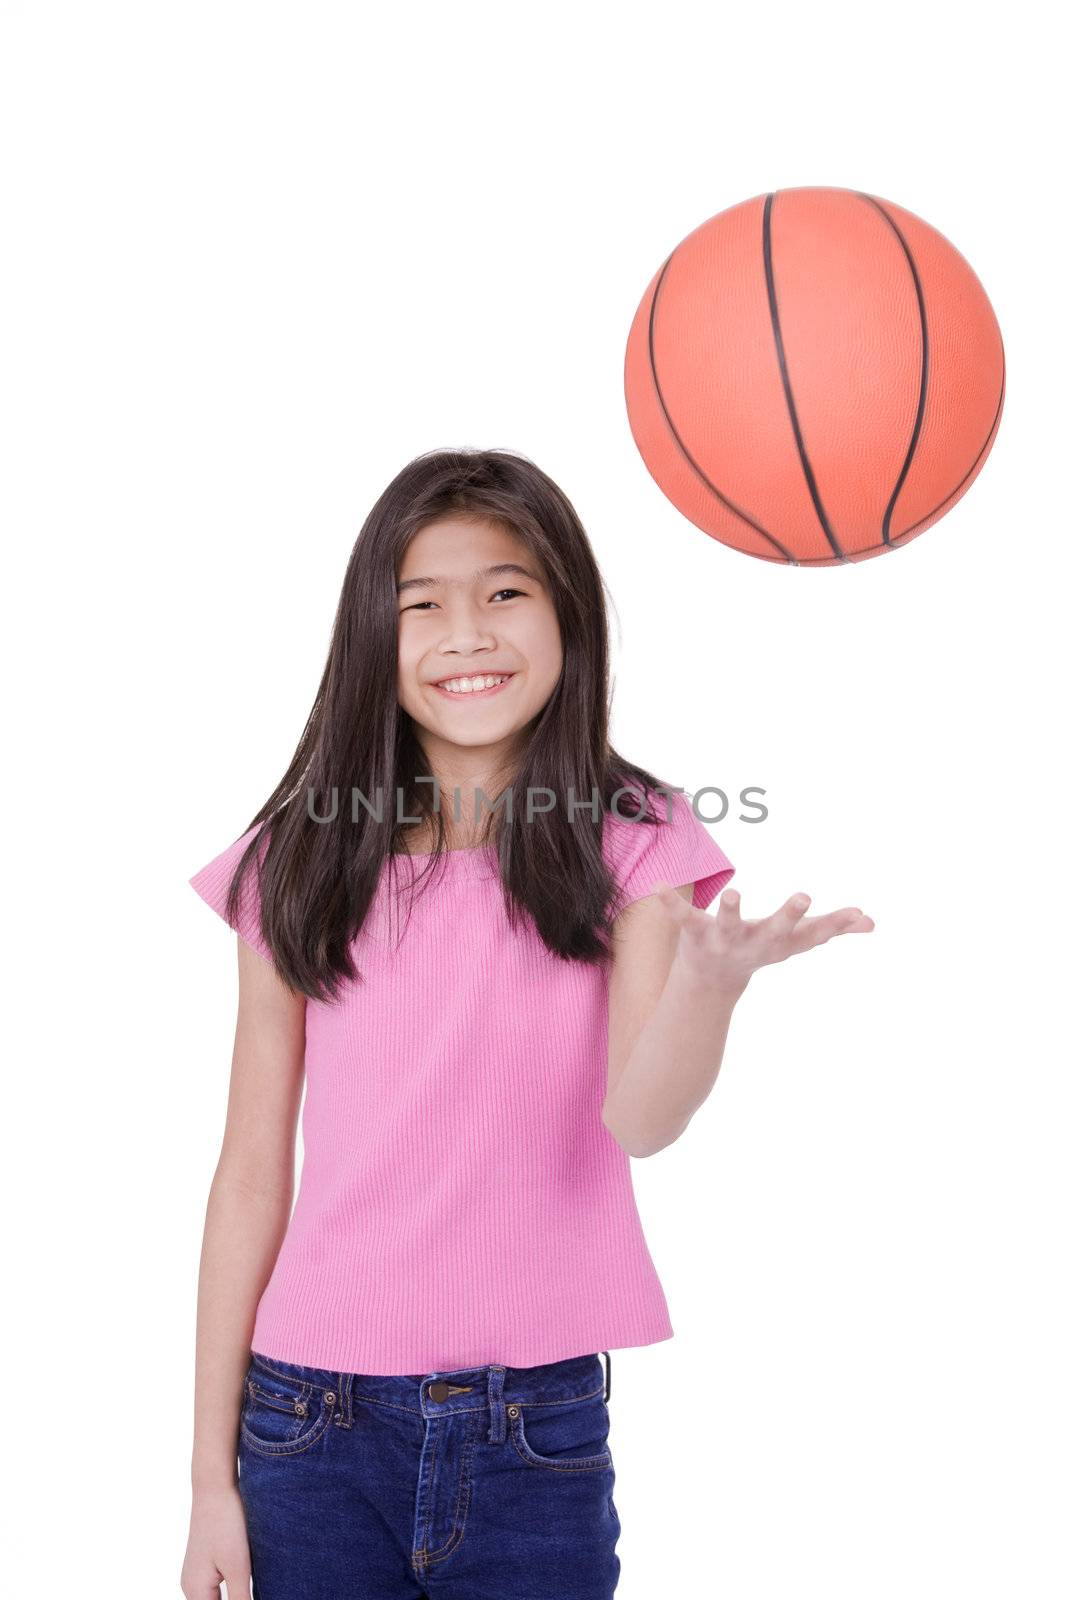 Young girl throwing basketball, isolated on white by jarenwicklund